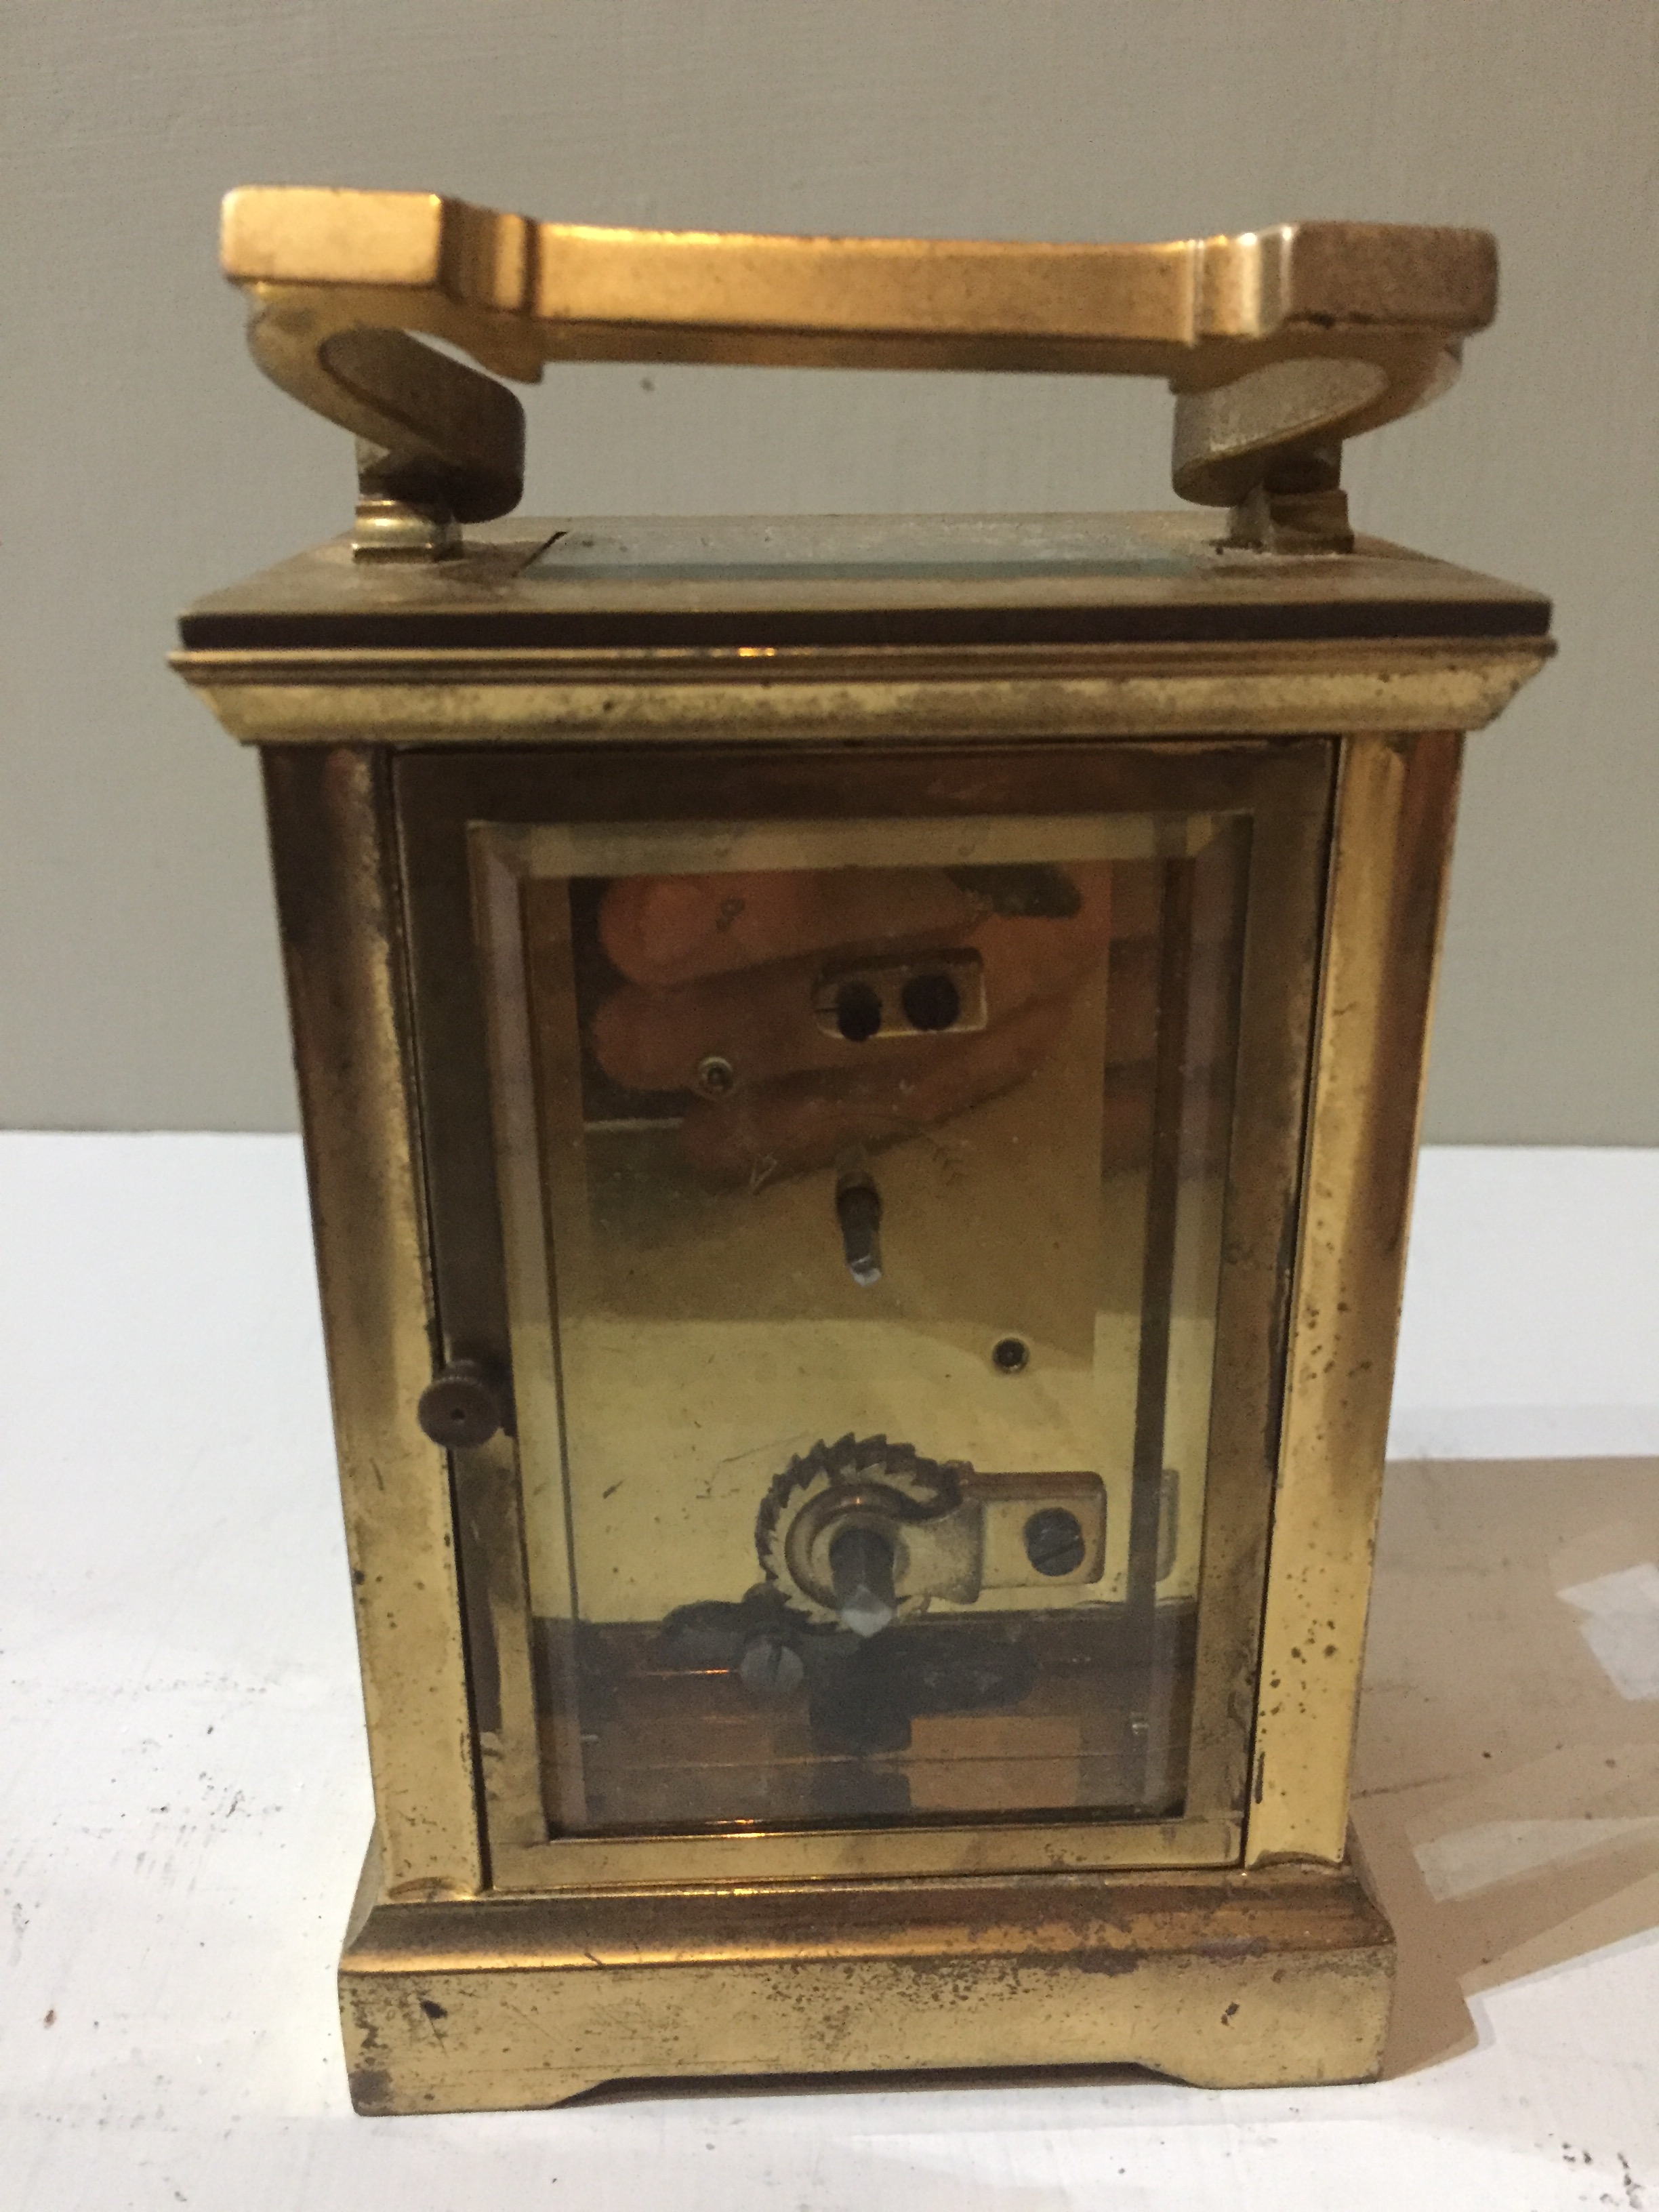 A LATE 19TH/20TH CENTURY BRASS CASED CARRIAGE CLOCK. (11.5cm x 6cm x 8cm) - Image 2 of 3